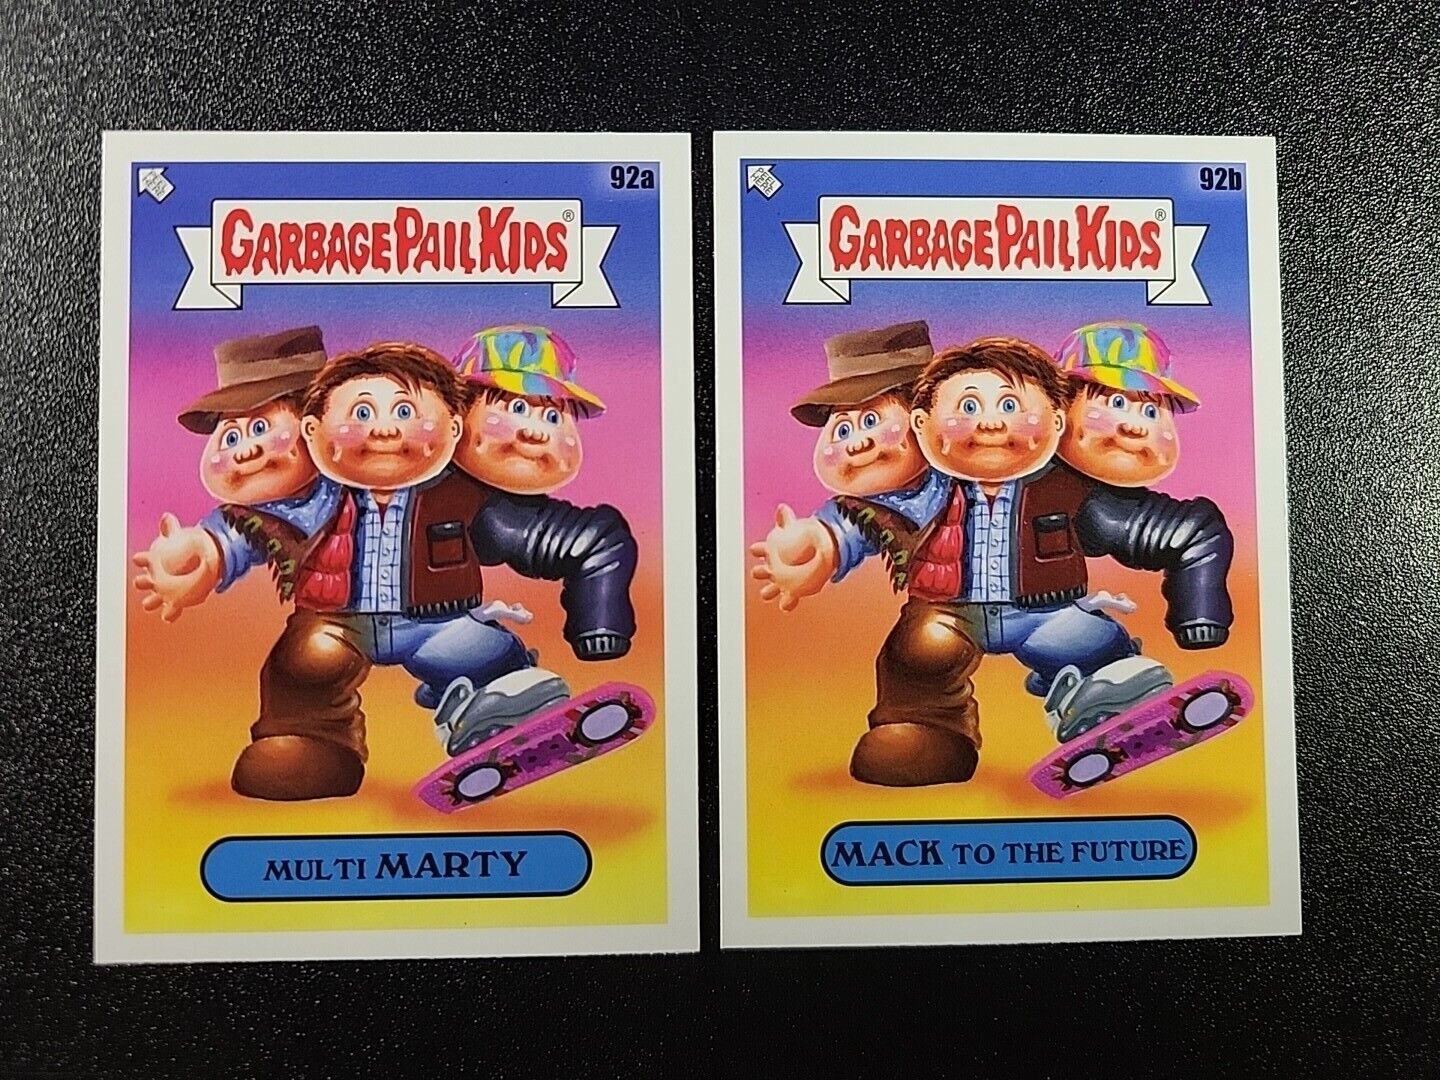 Back to the Future 2 3 Michael J Fox Marty McFly Spoof Garbage Pail Kids 2 Card